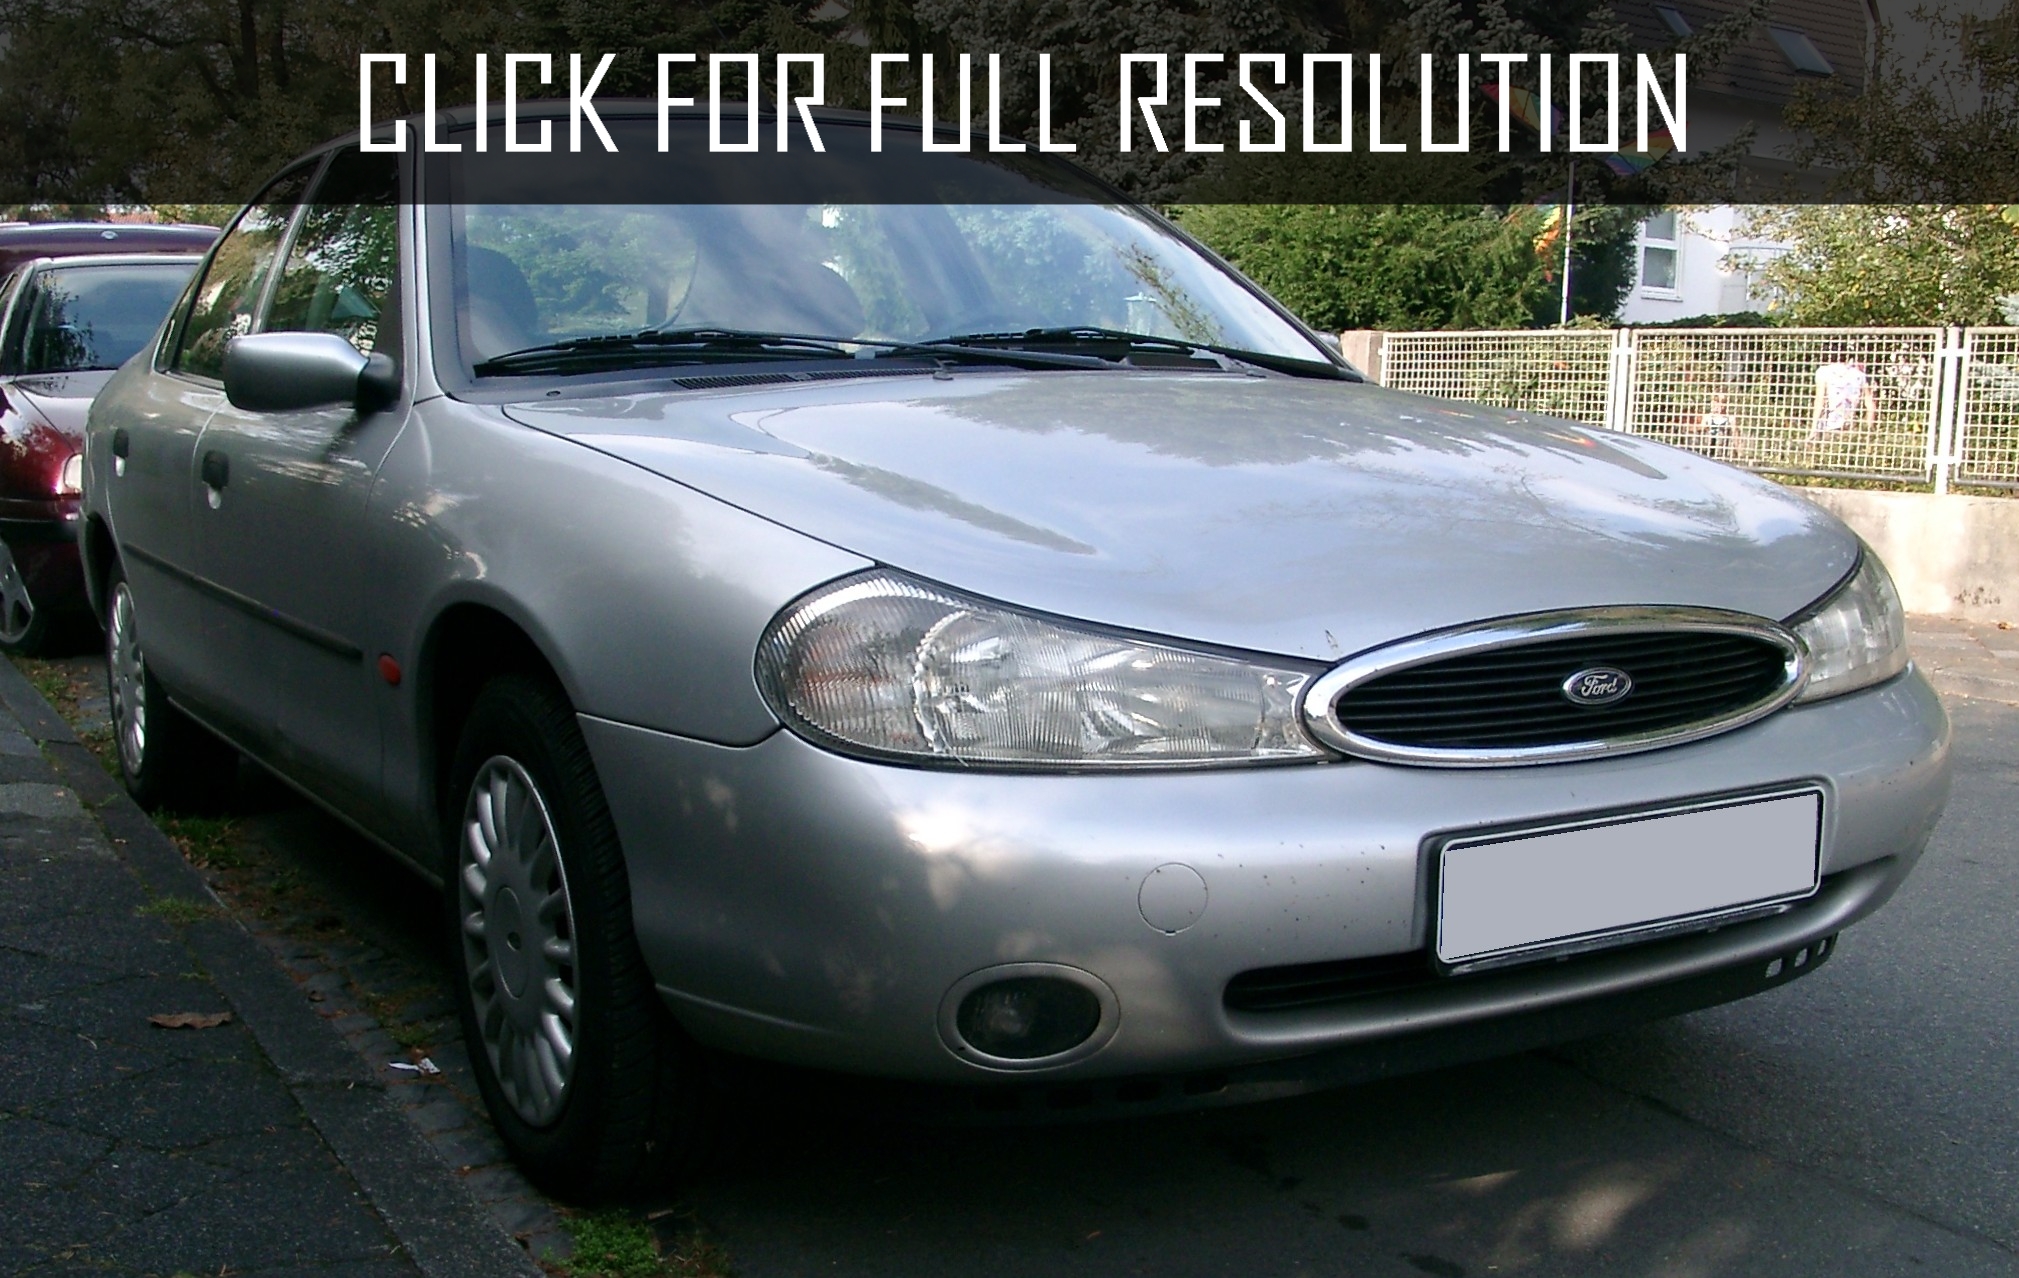 1997 Ford Mondeo news, reviews, msrp, ratings with